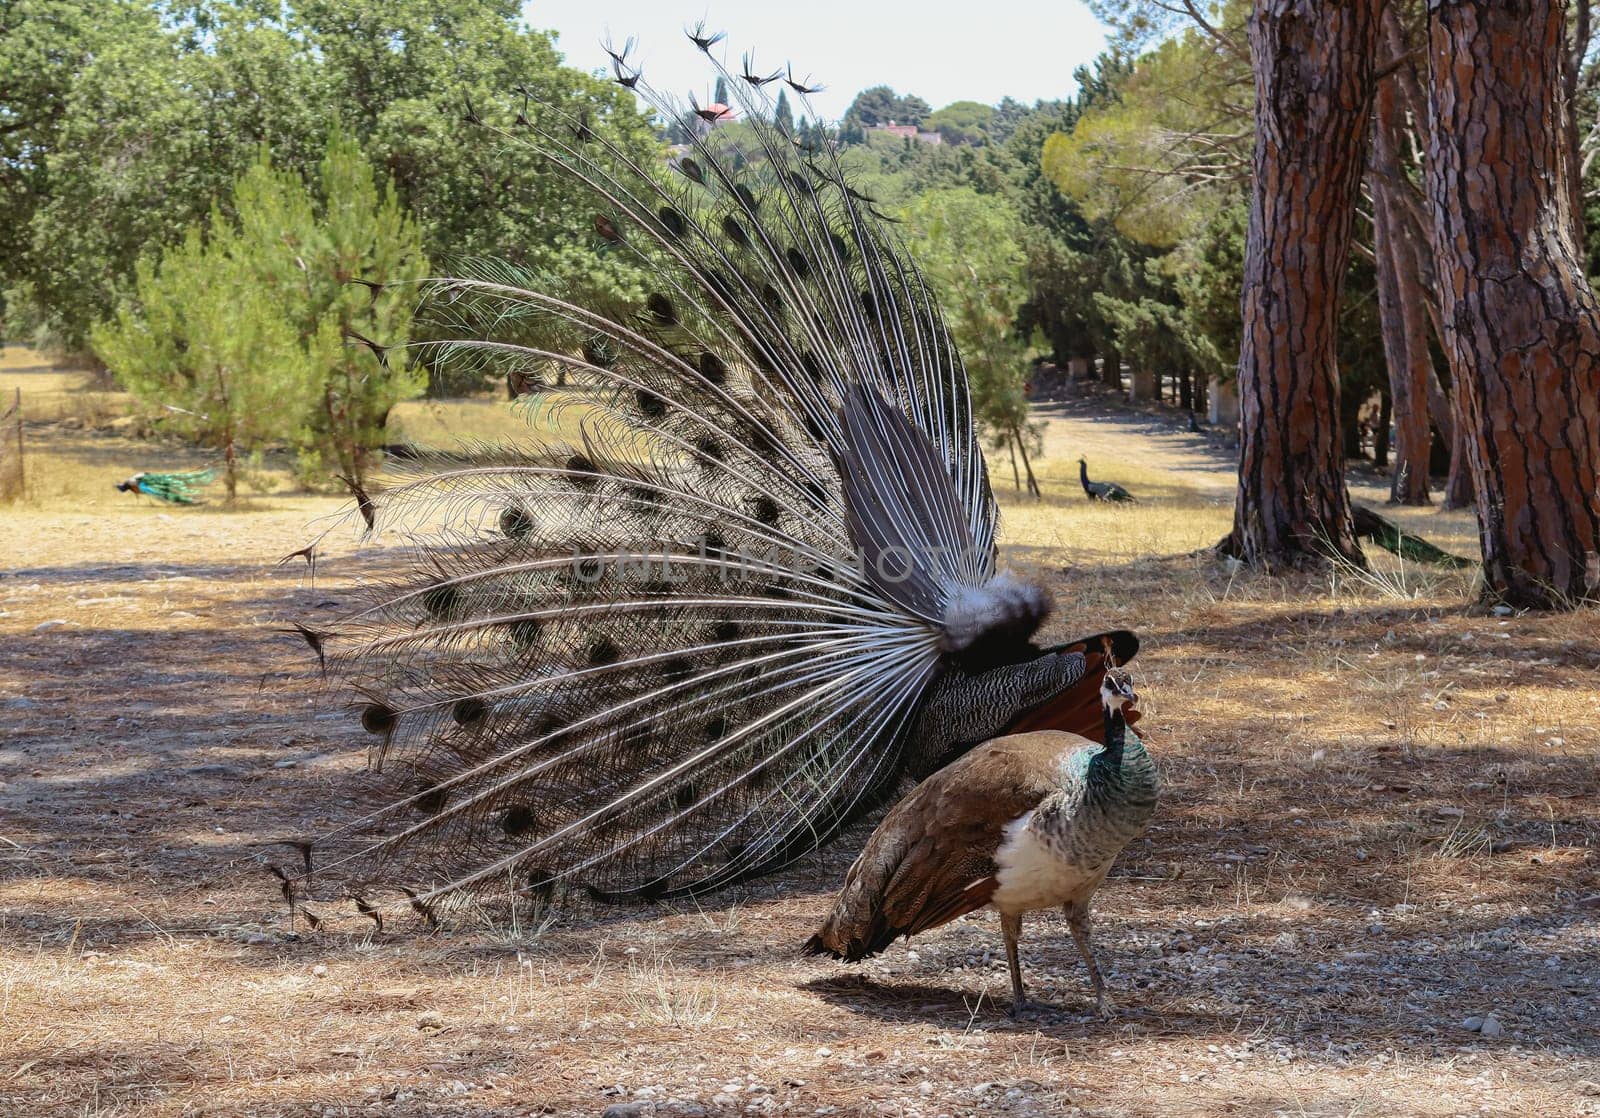 A male peacock dances a courtship dance in front of a female peacock in the park. by Nataliya